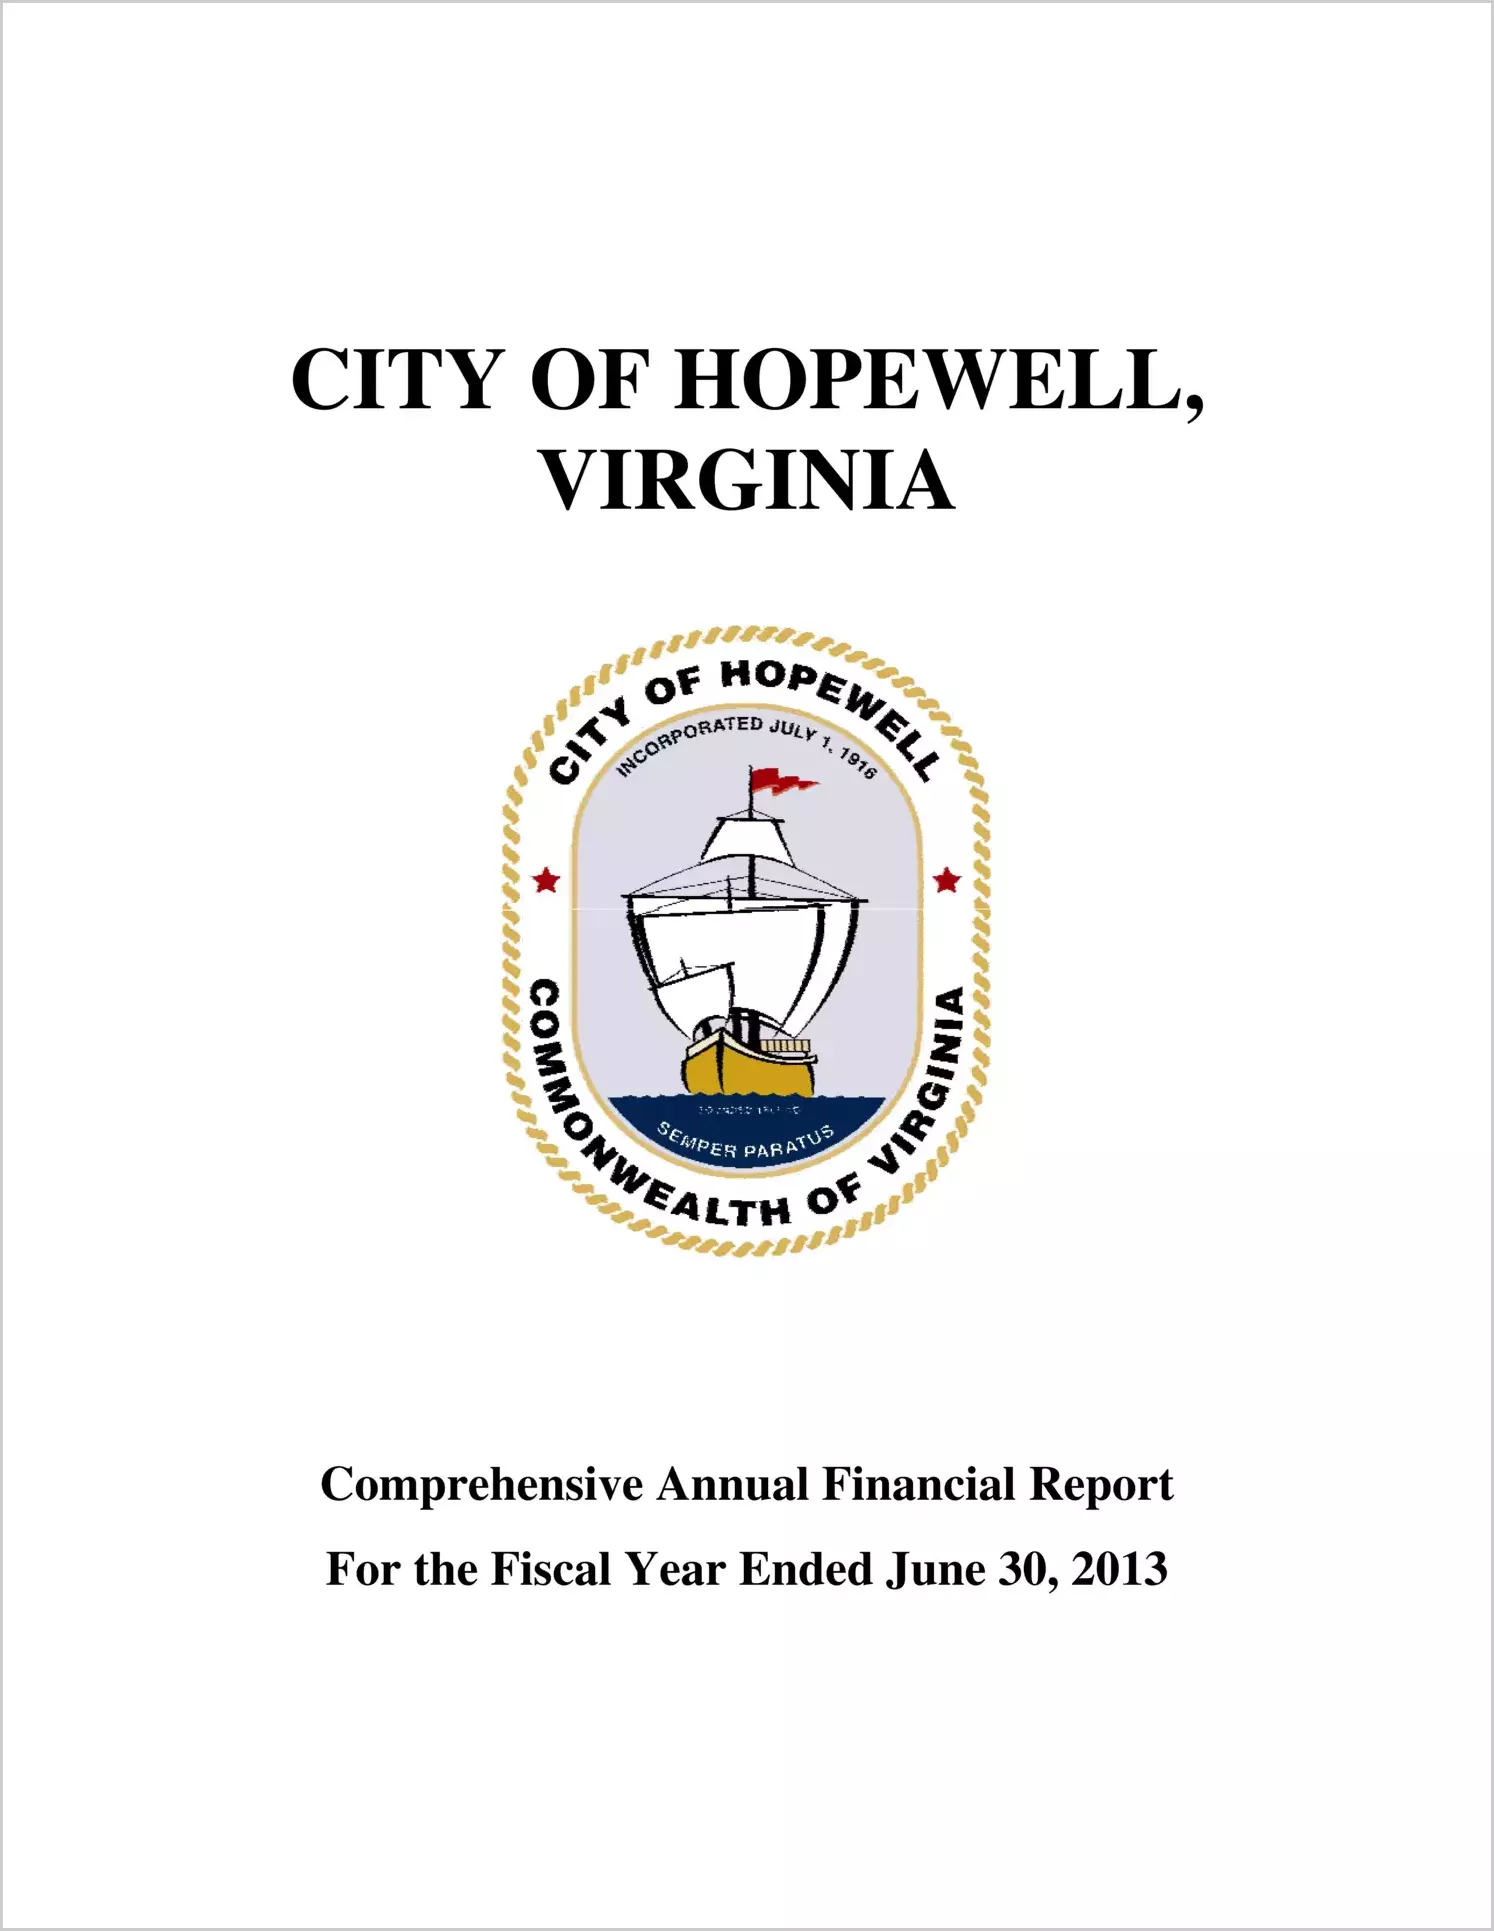 2013 Annual Financial Report for City of Hopewell